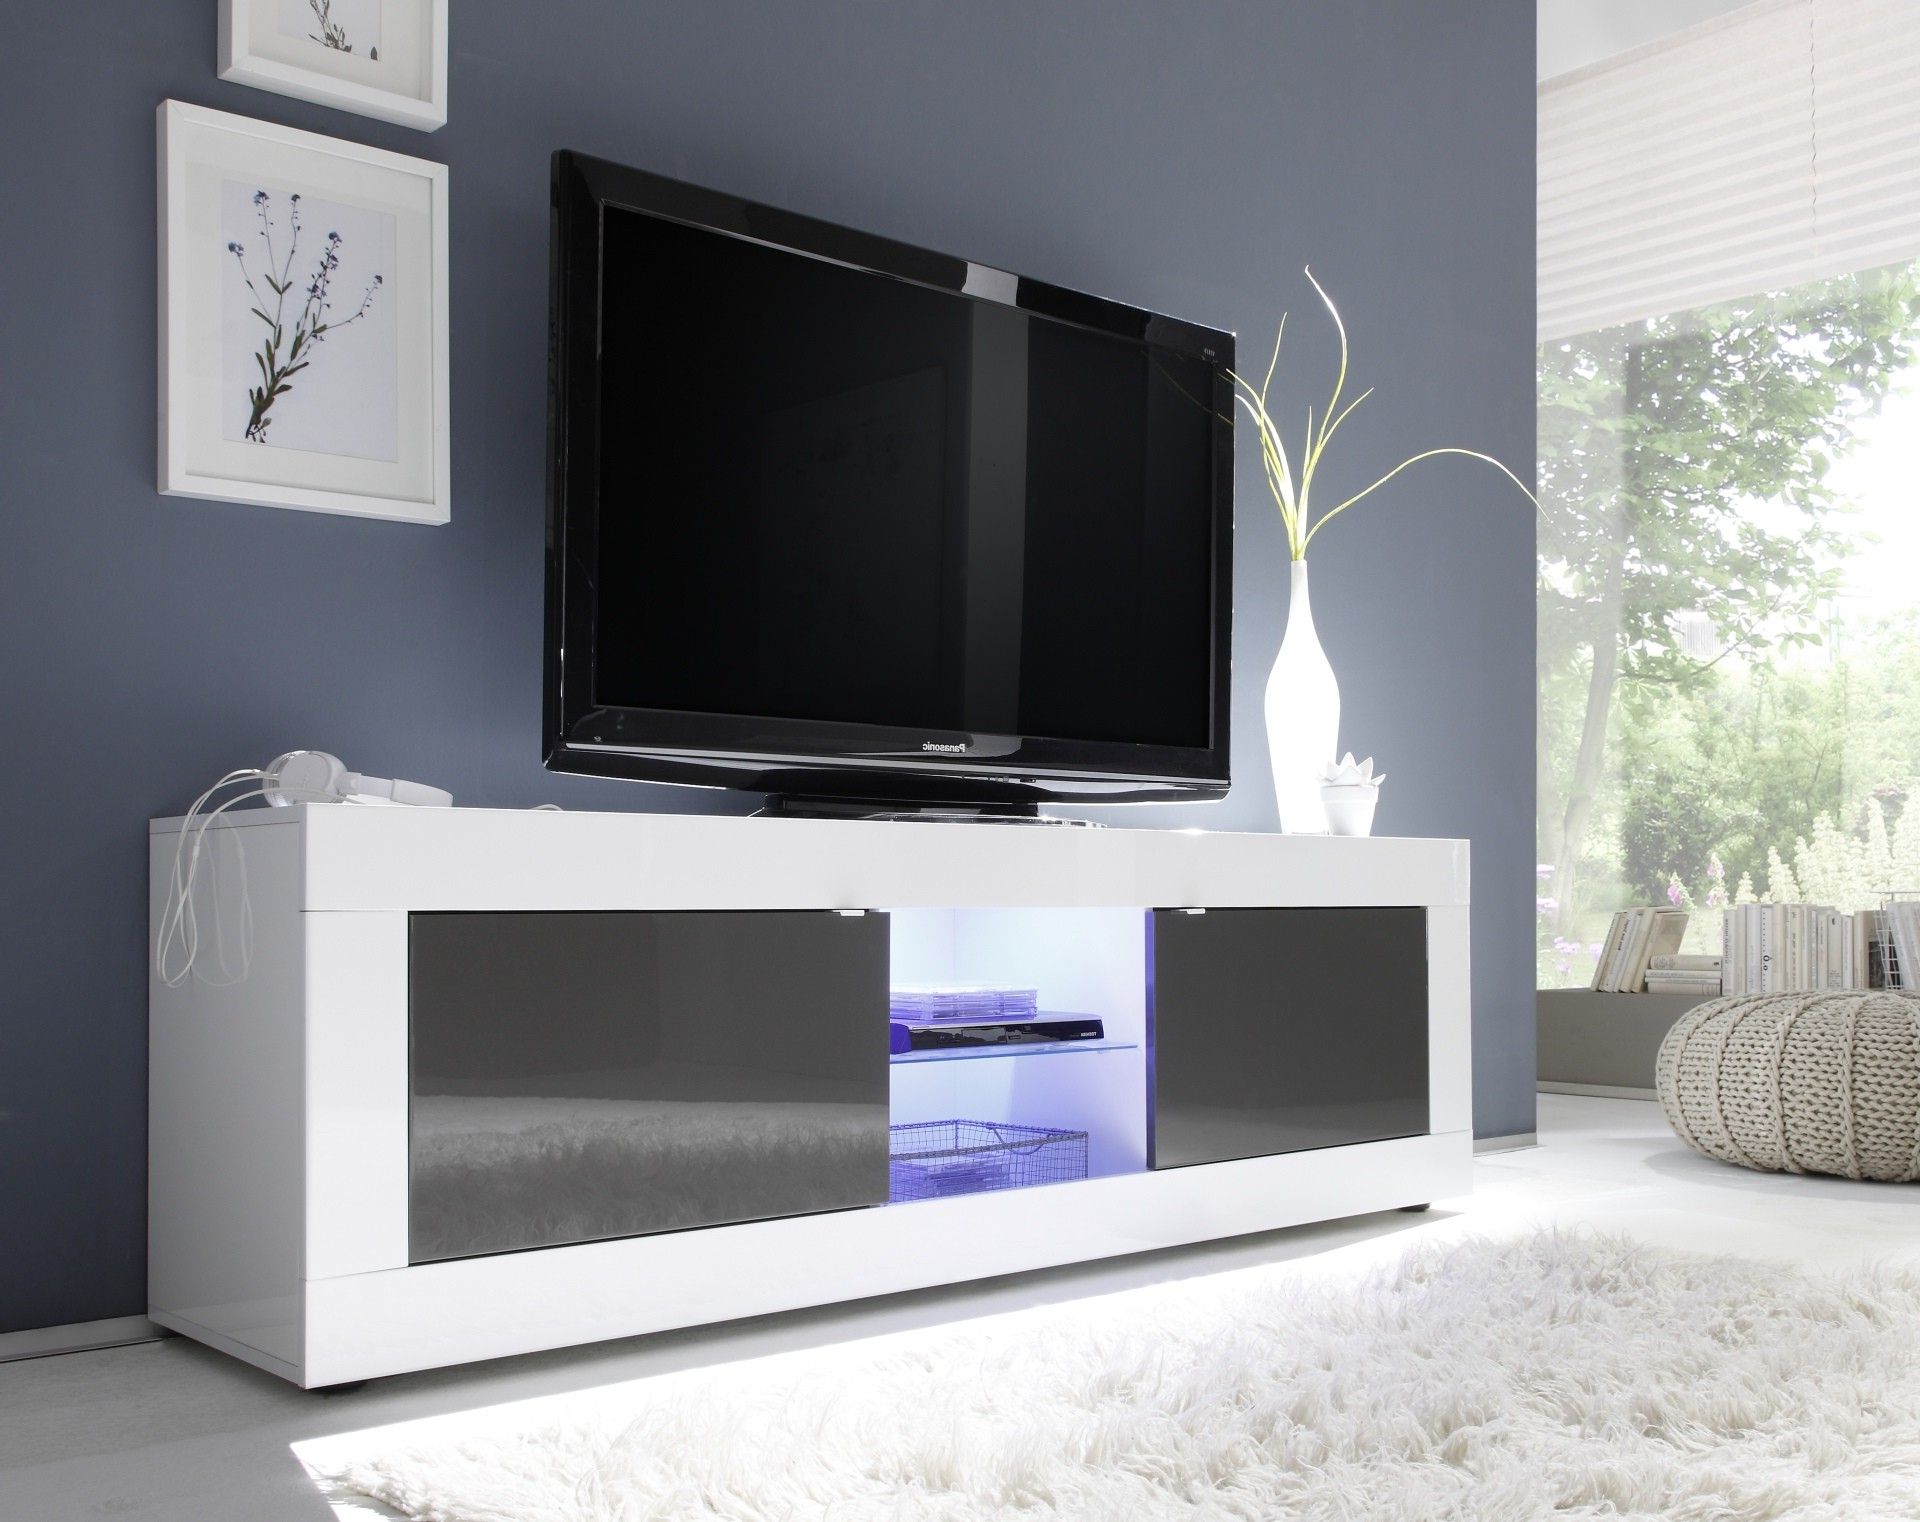 20 Best Ideas of Long White Tv Stands